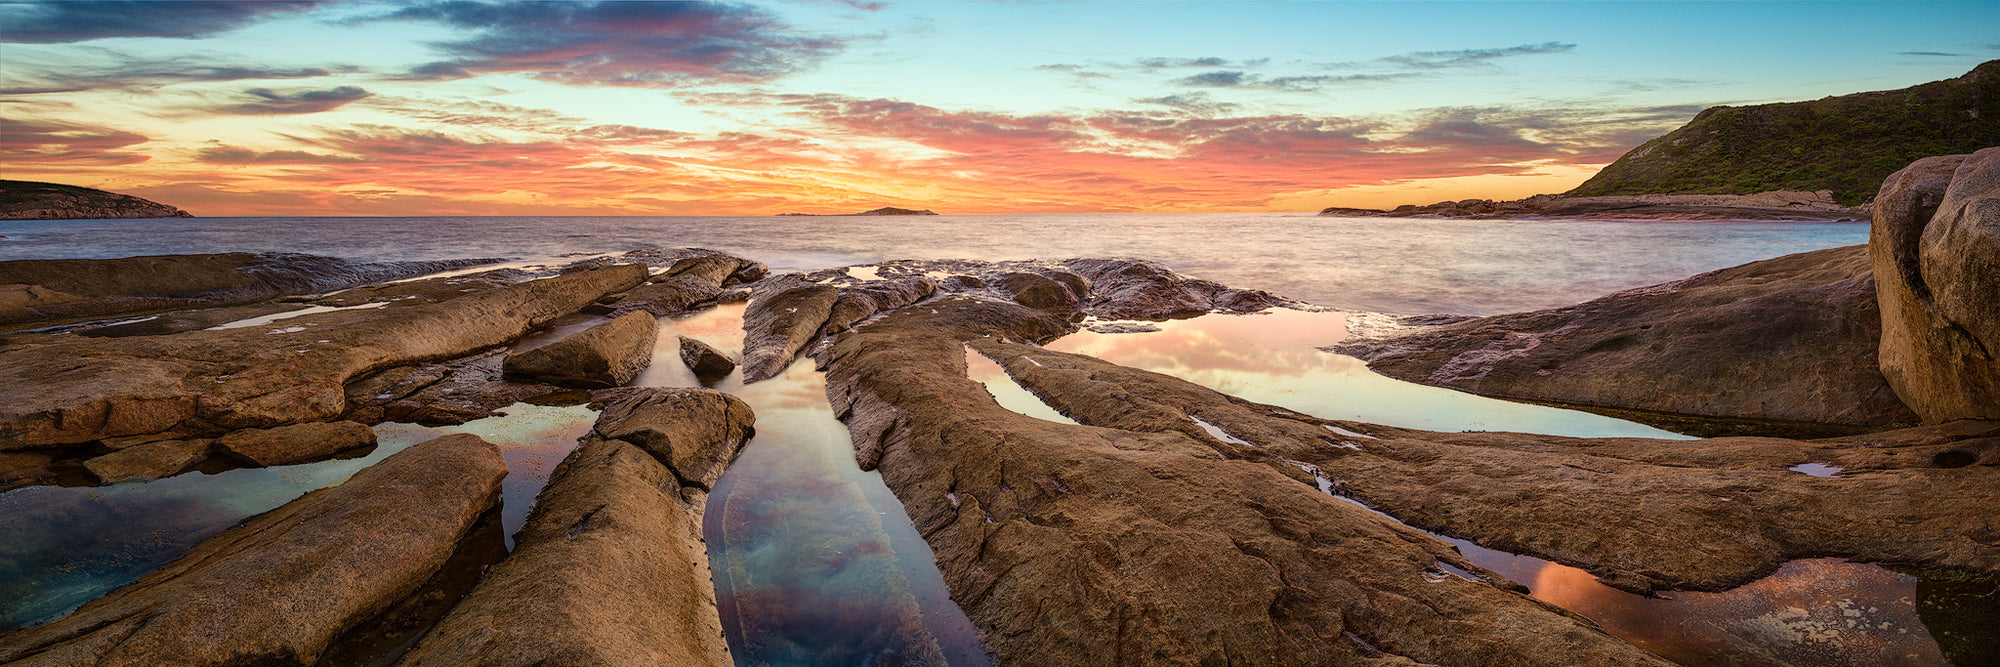 Observation point rocky beach with reflections of the clouds in the water at sunset Esperance panorama